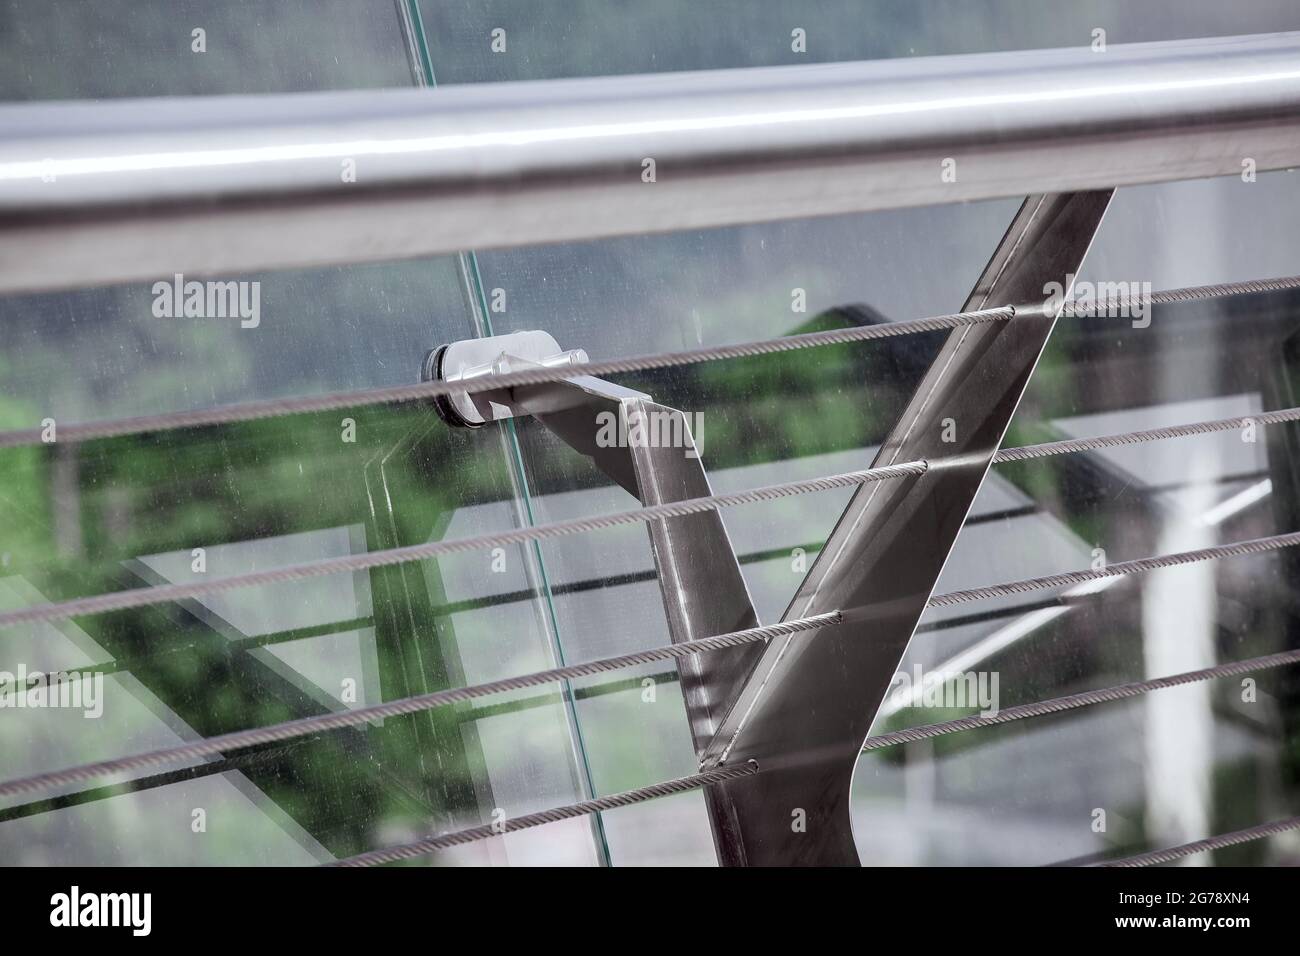 railings with glass panels fastenings enclosing the edge of the pedestrian bridge with tension steel cables for tensioning the structure close-up. Stock Photo